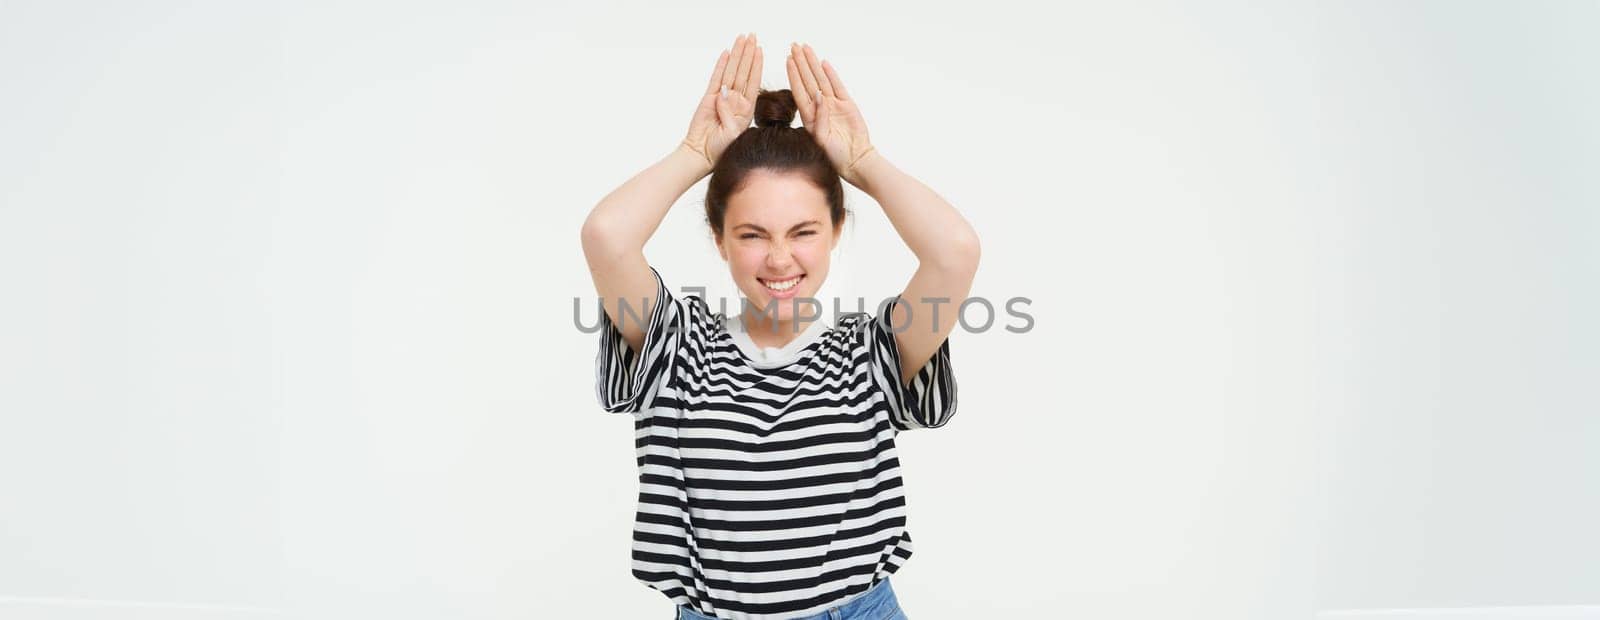 Image of beautiful, happy young woman showing bunny ears on top of her head, looking excited, posing over white background. Lifestyle and people concept